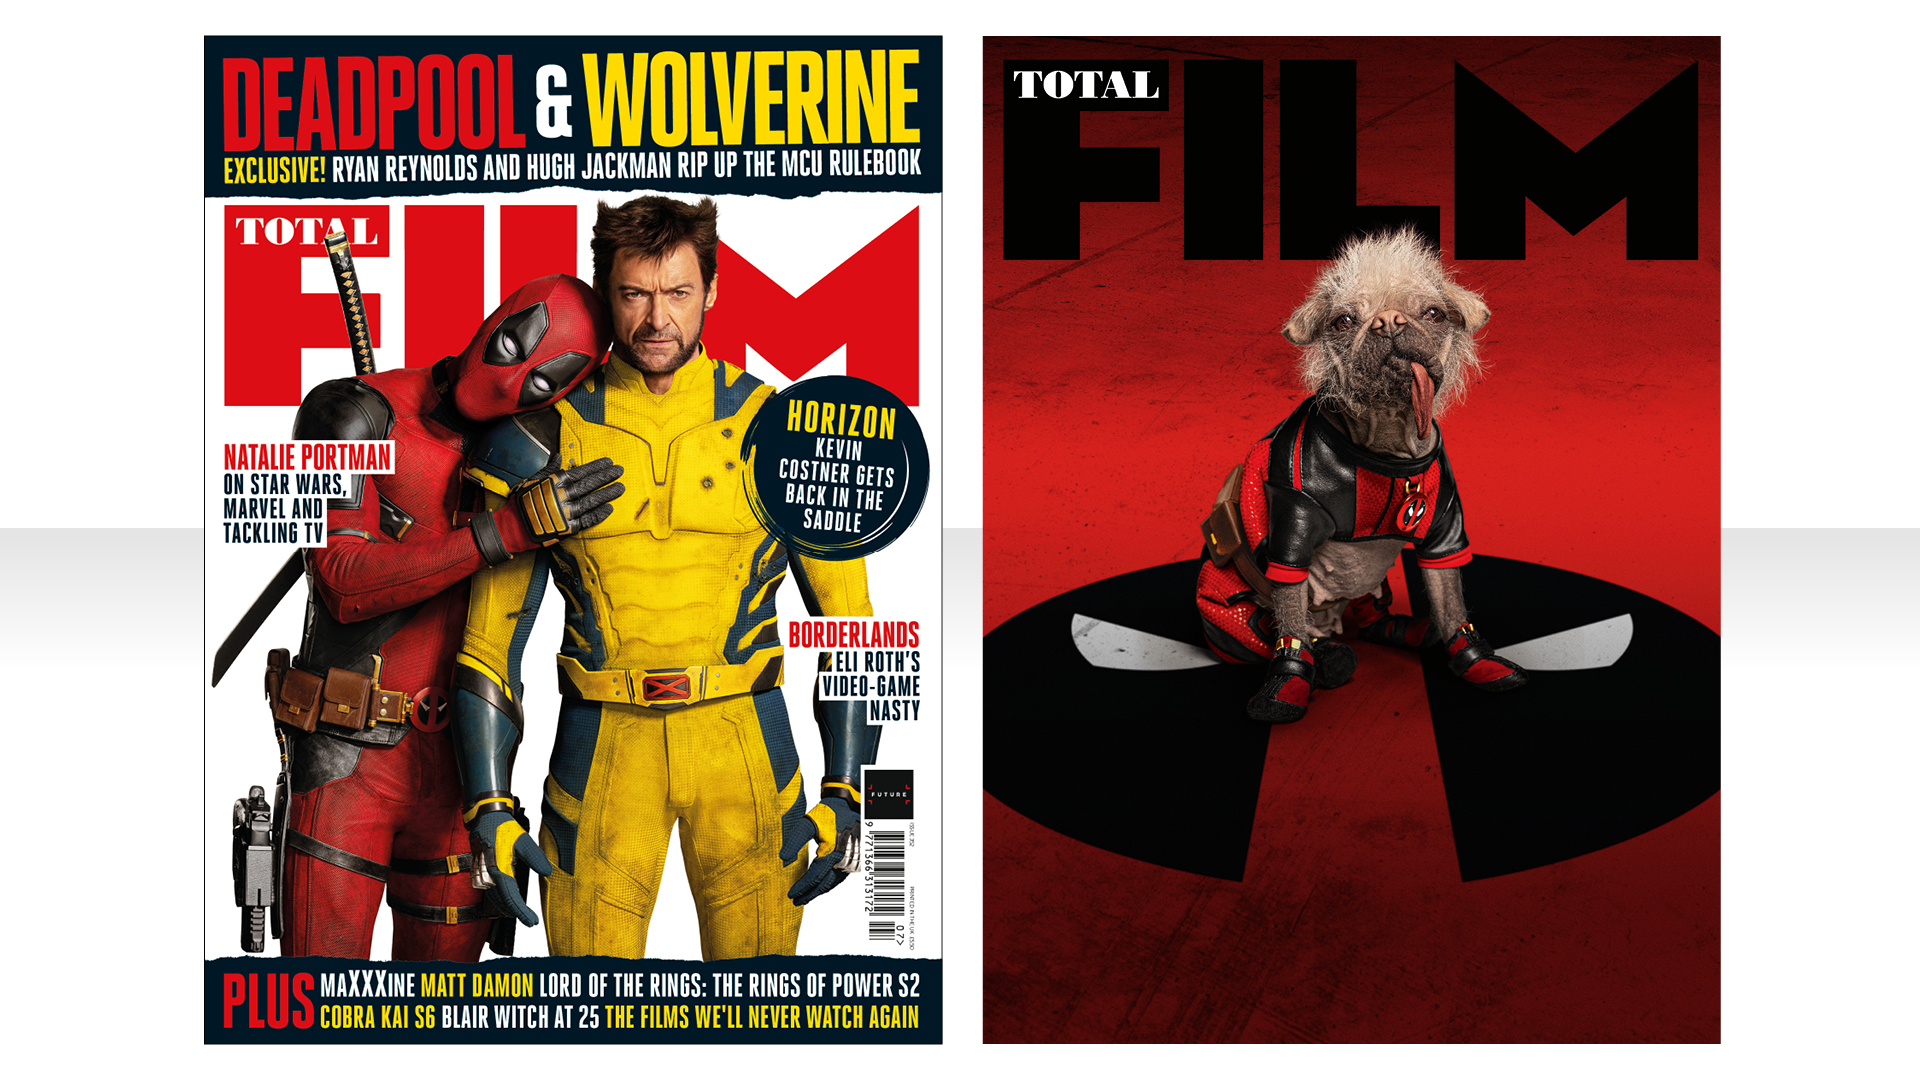 Ryan Reynolds and Hugh Jackman on the cover of Total Film's Deadpool & Wolverine issue